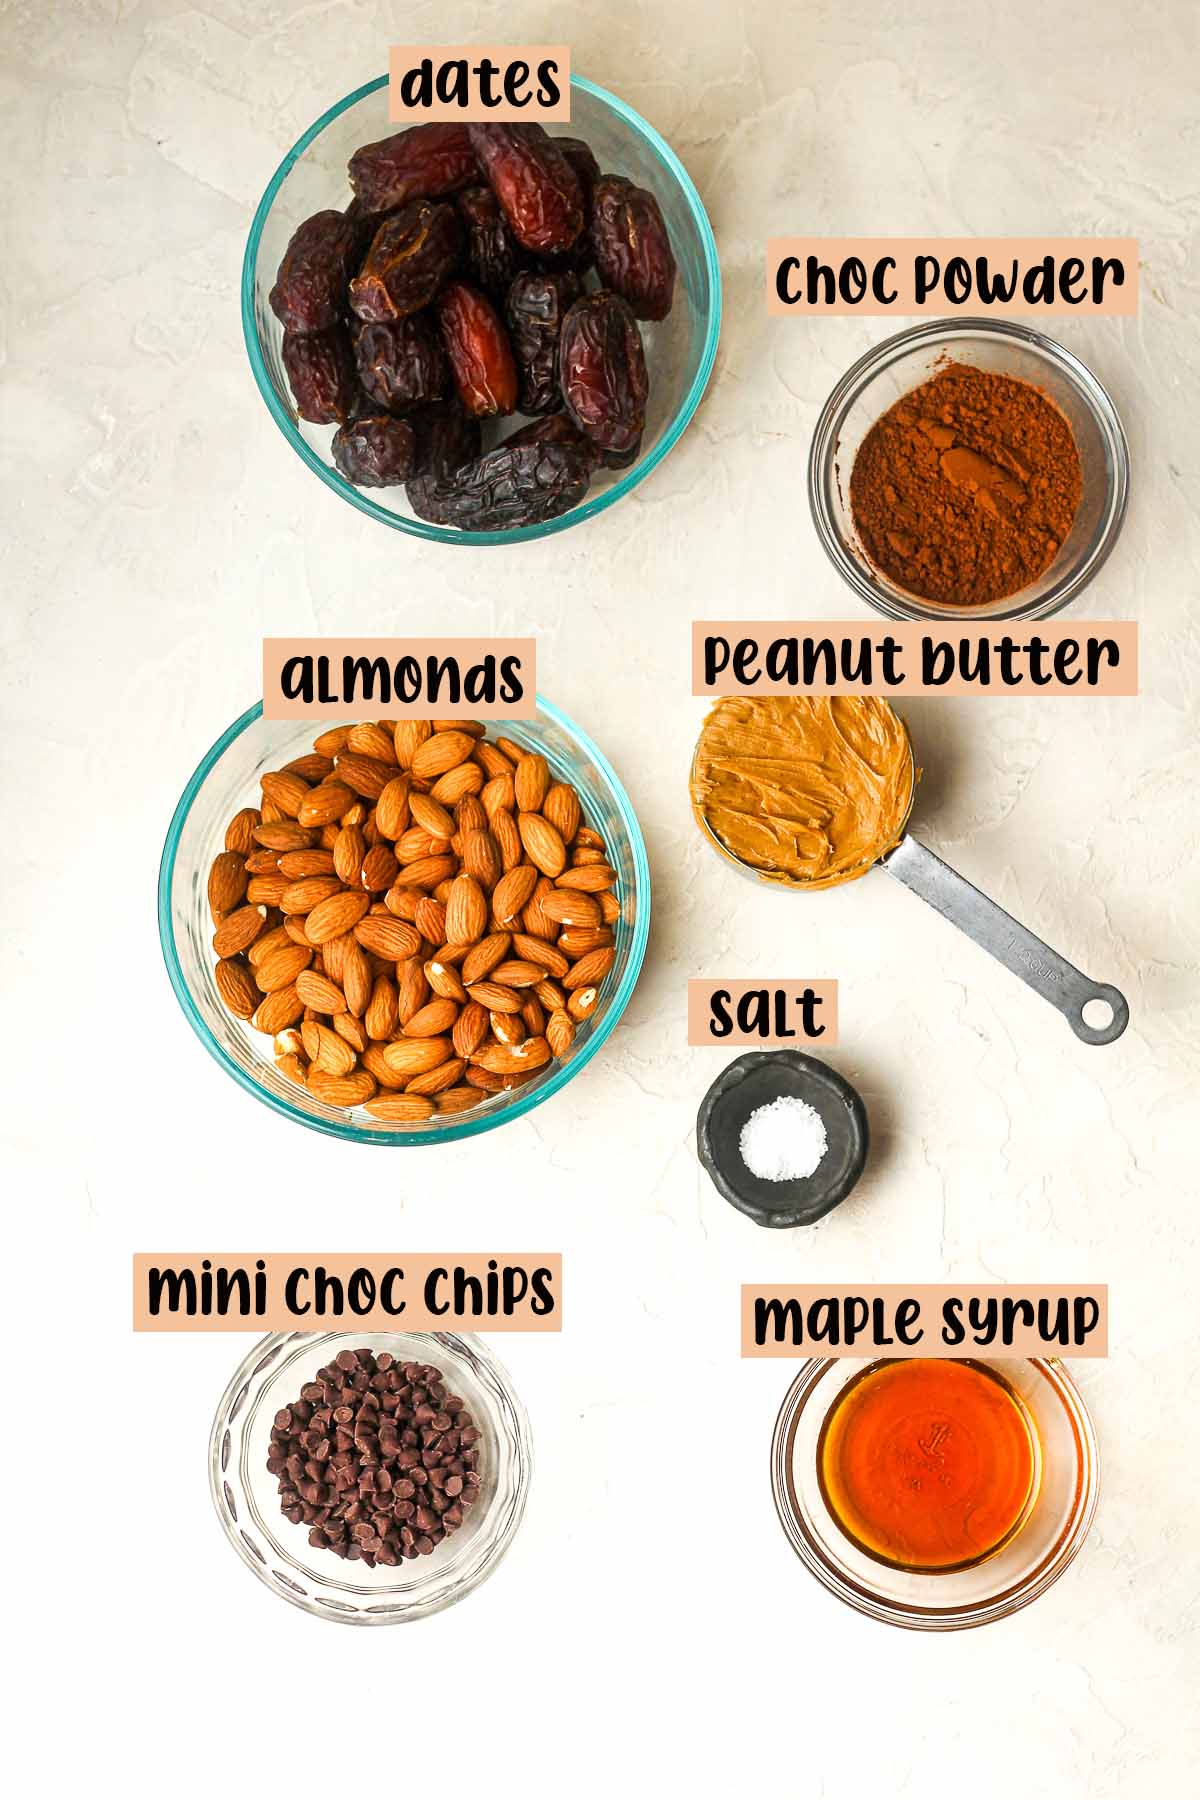 Labeled ingredients for the chocolate bliss balls.